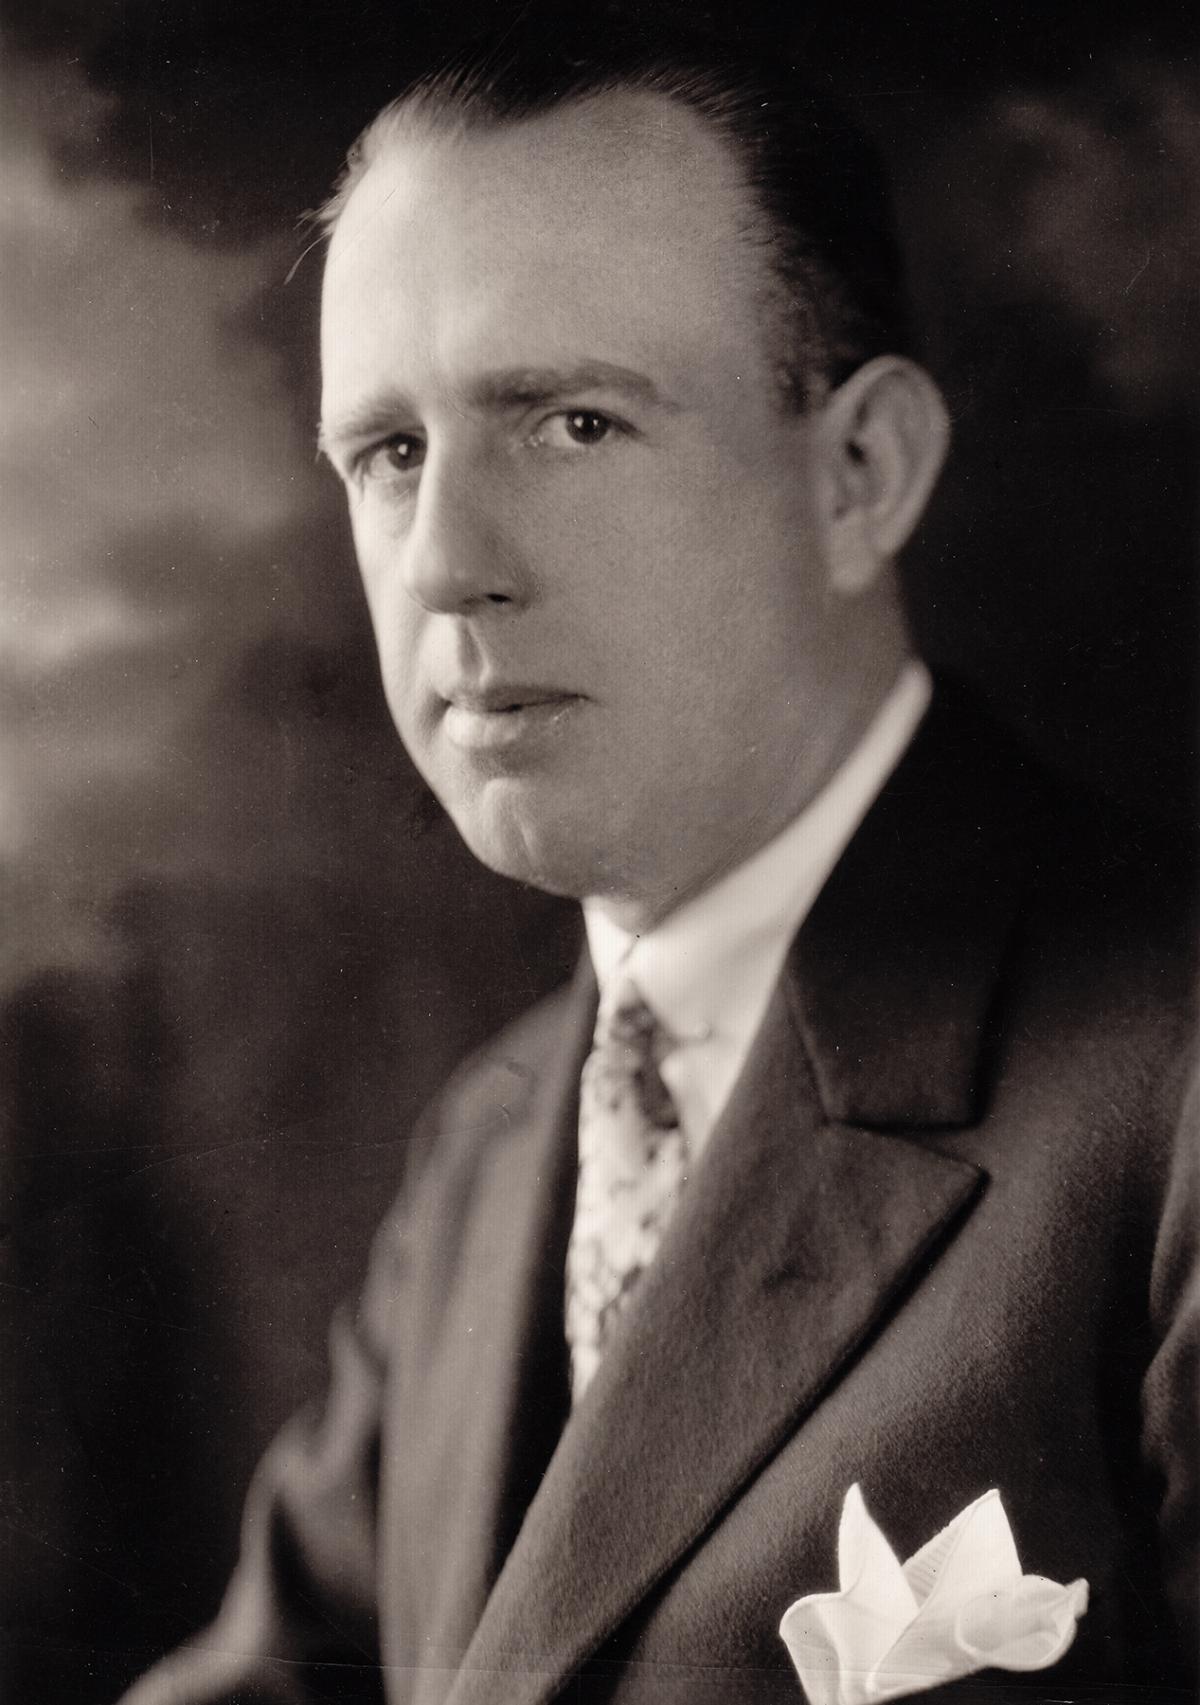 Shoulders-up photo of Powel Crosley, wearing a suit and pocket square